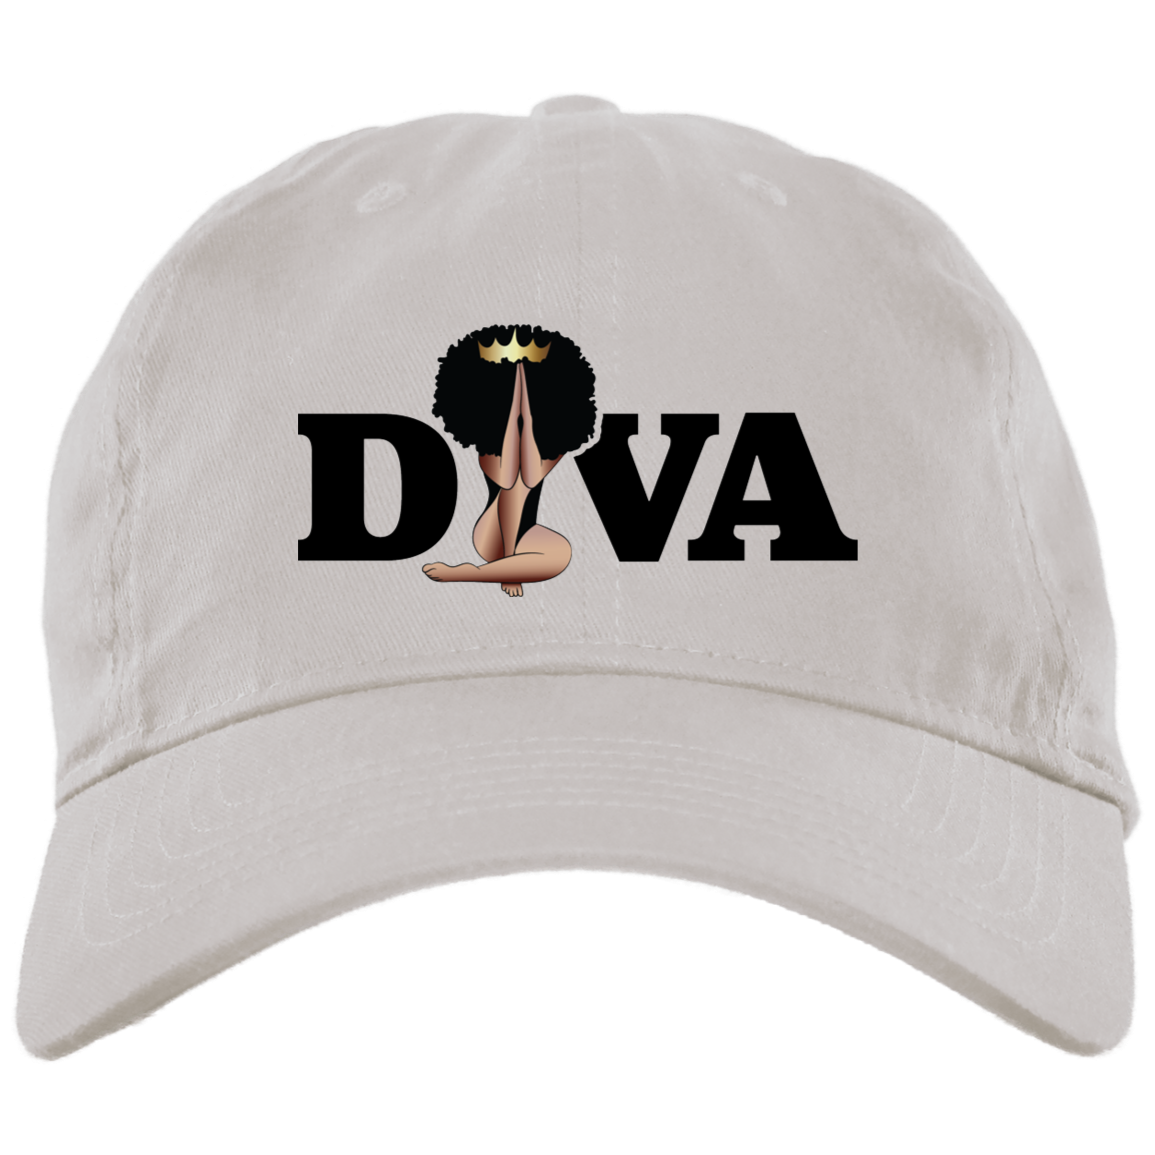 Diva Embroidered Brushed Twill Unstructured Dad Cap